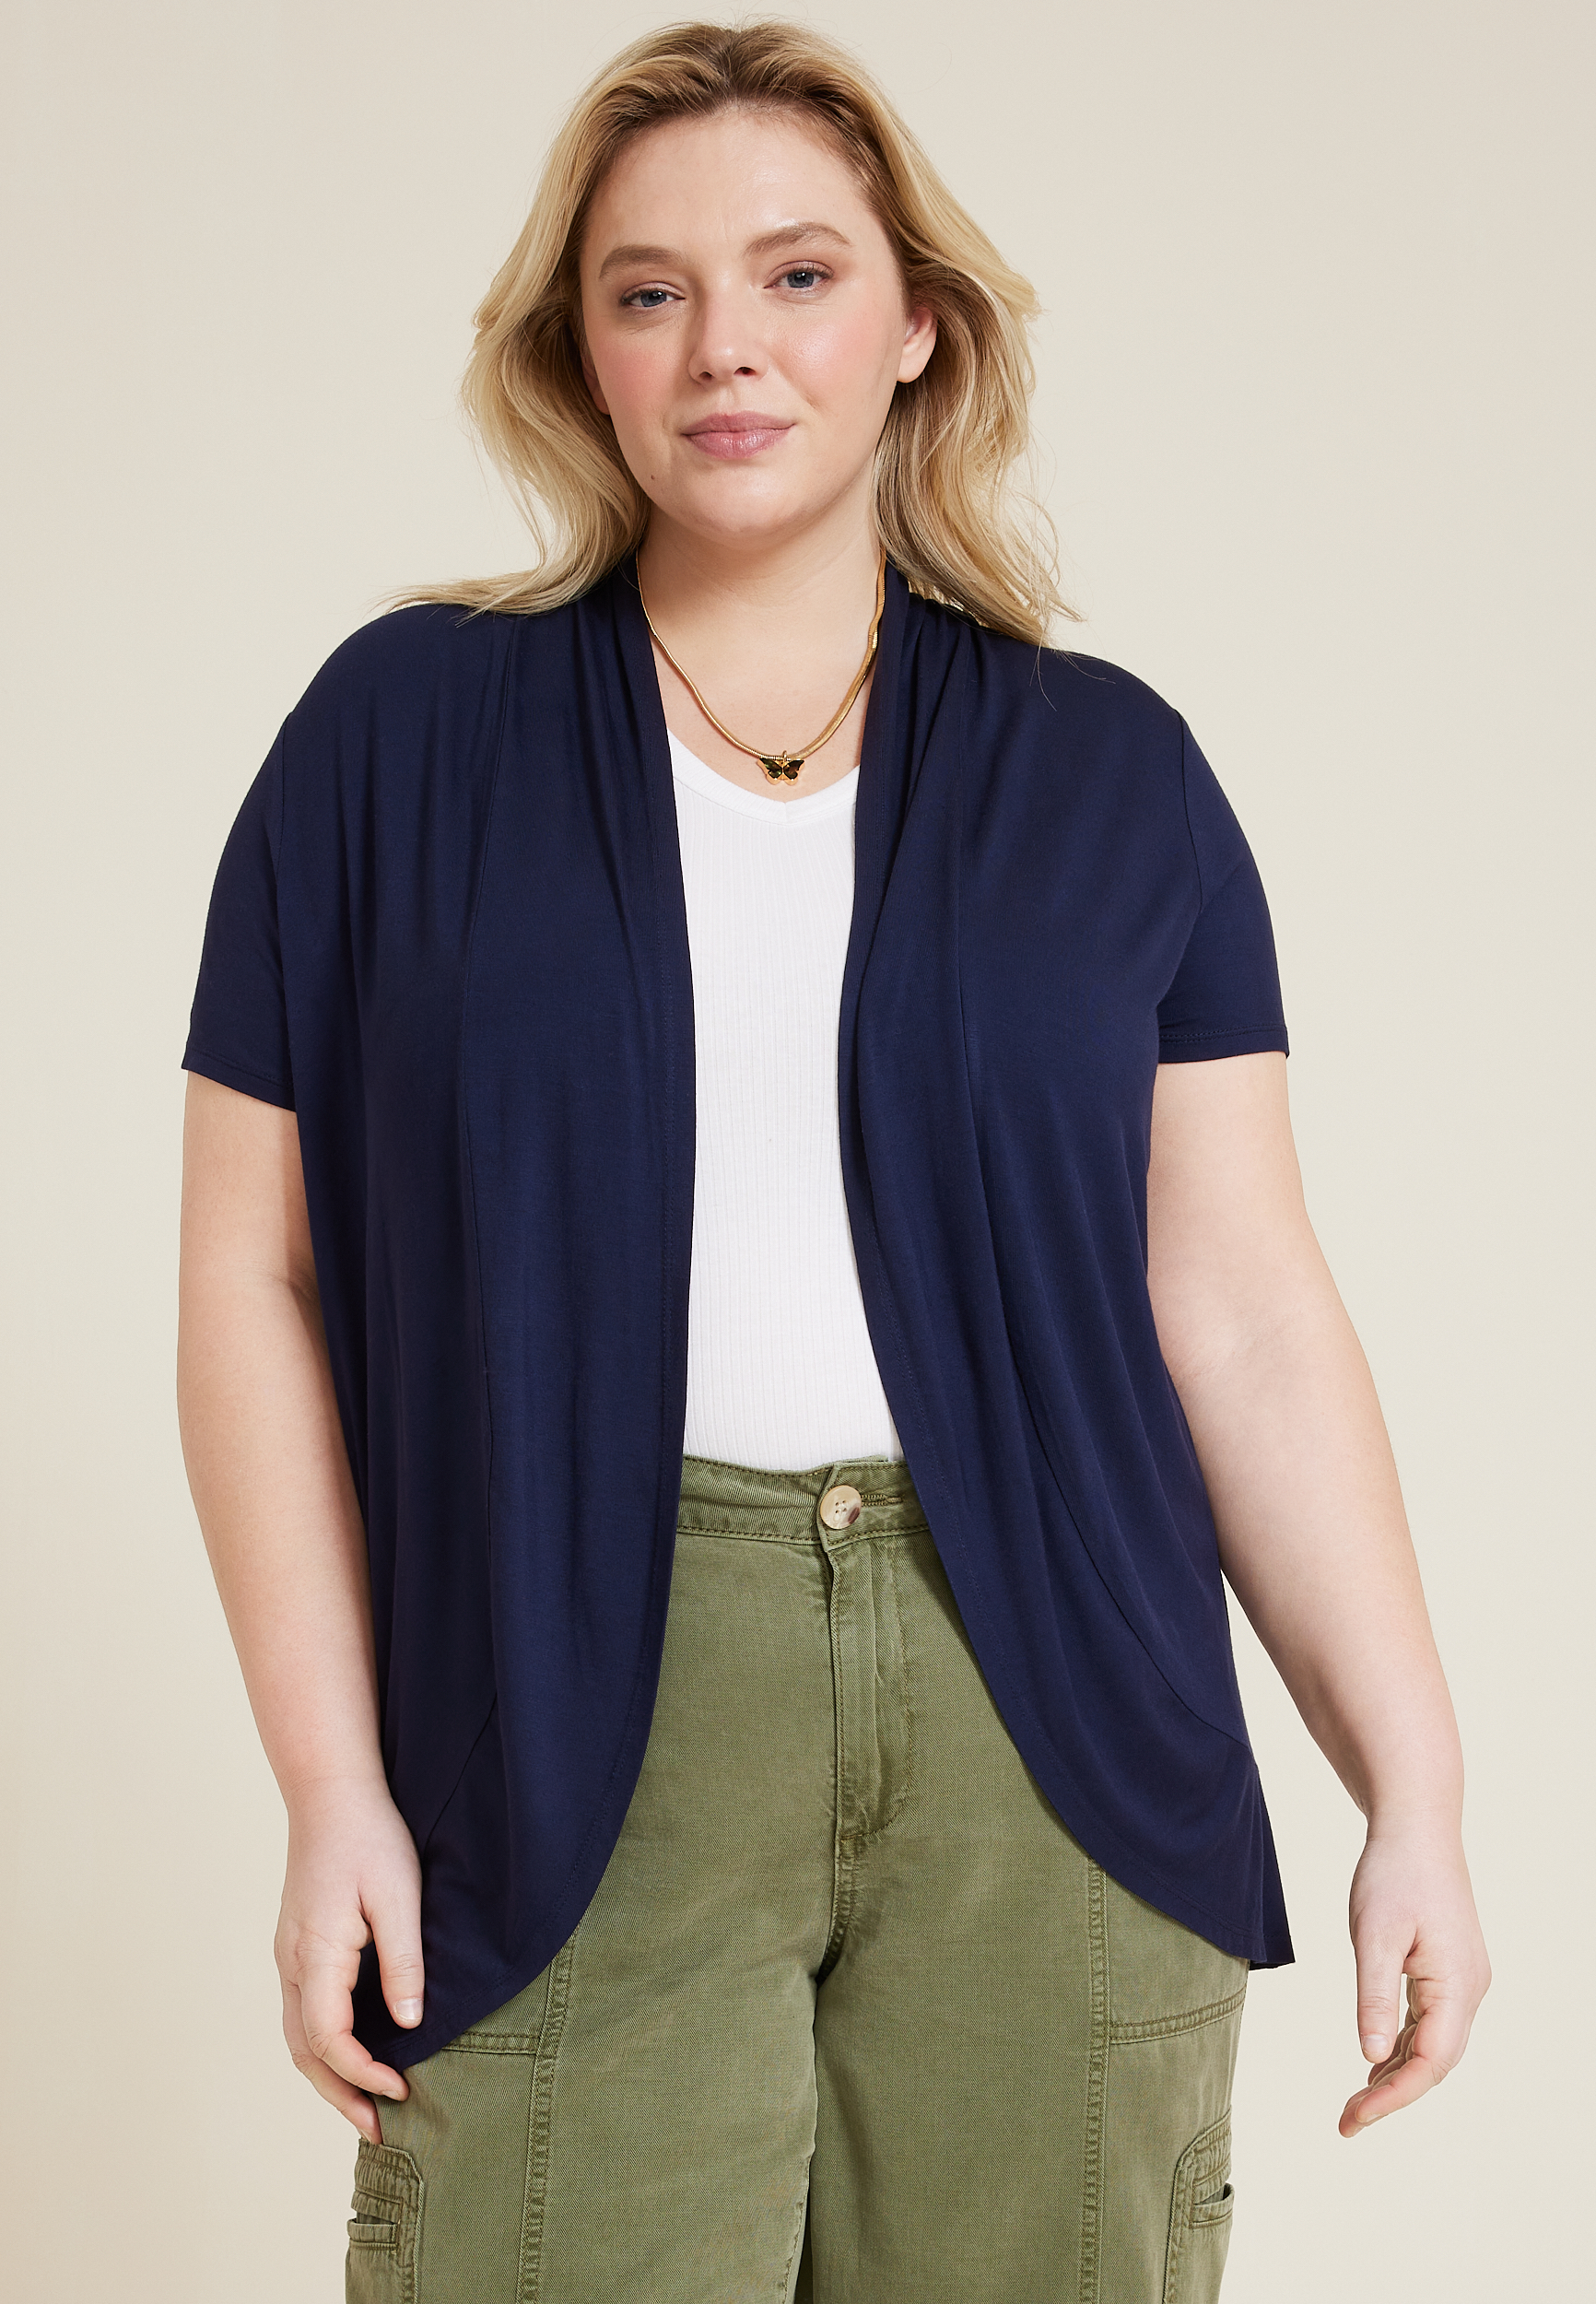 Clearance Sale - Plus Size Womens Clothing At Unbeatable Prices – The Pink  Moon